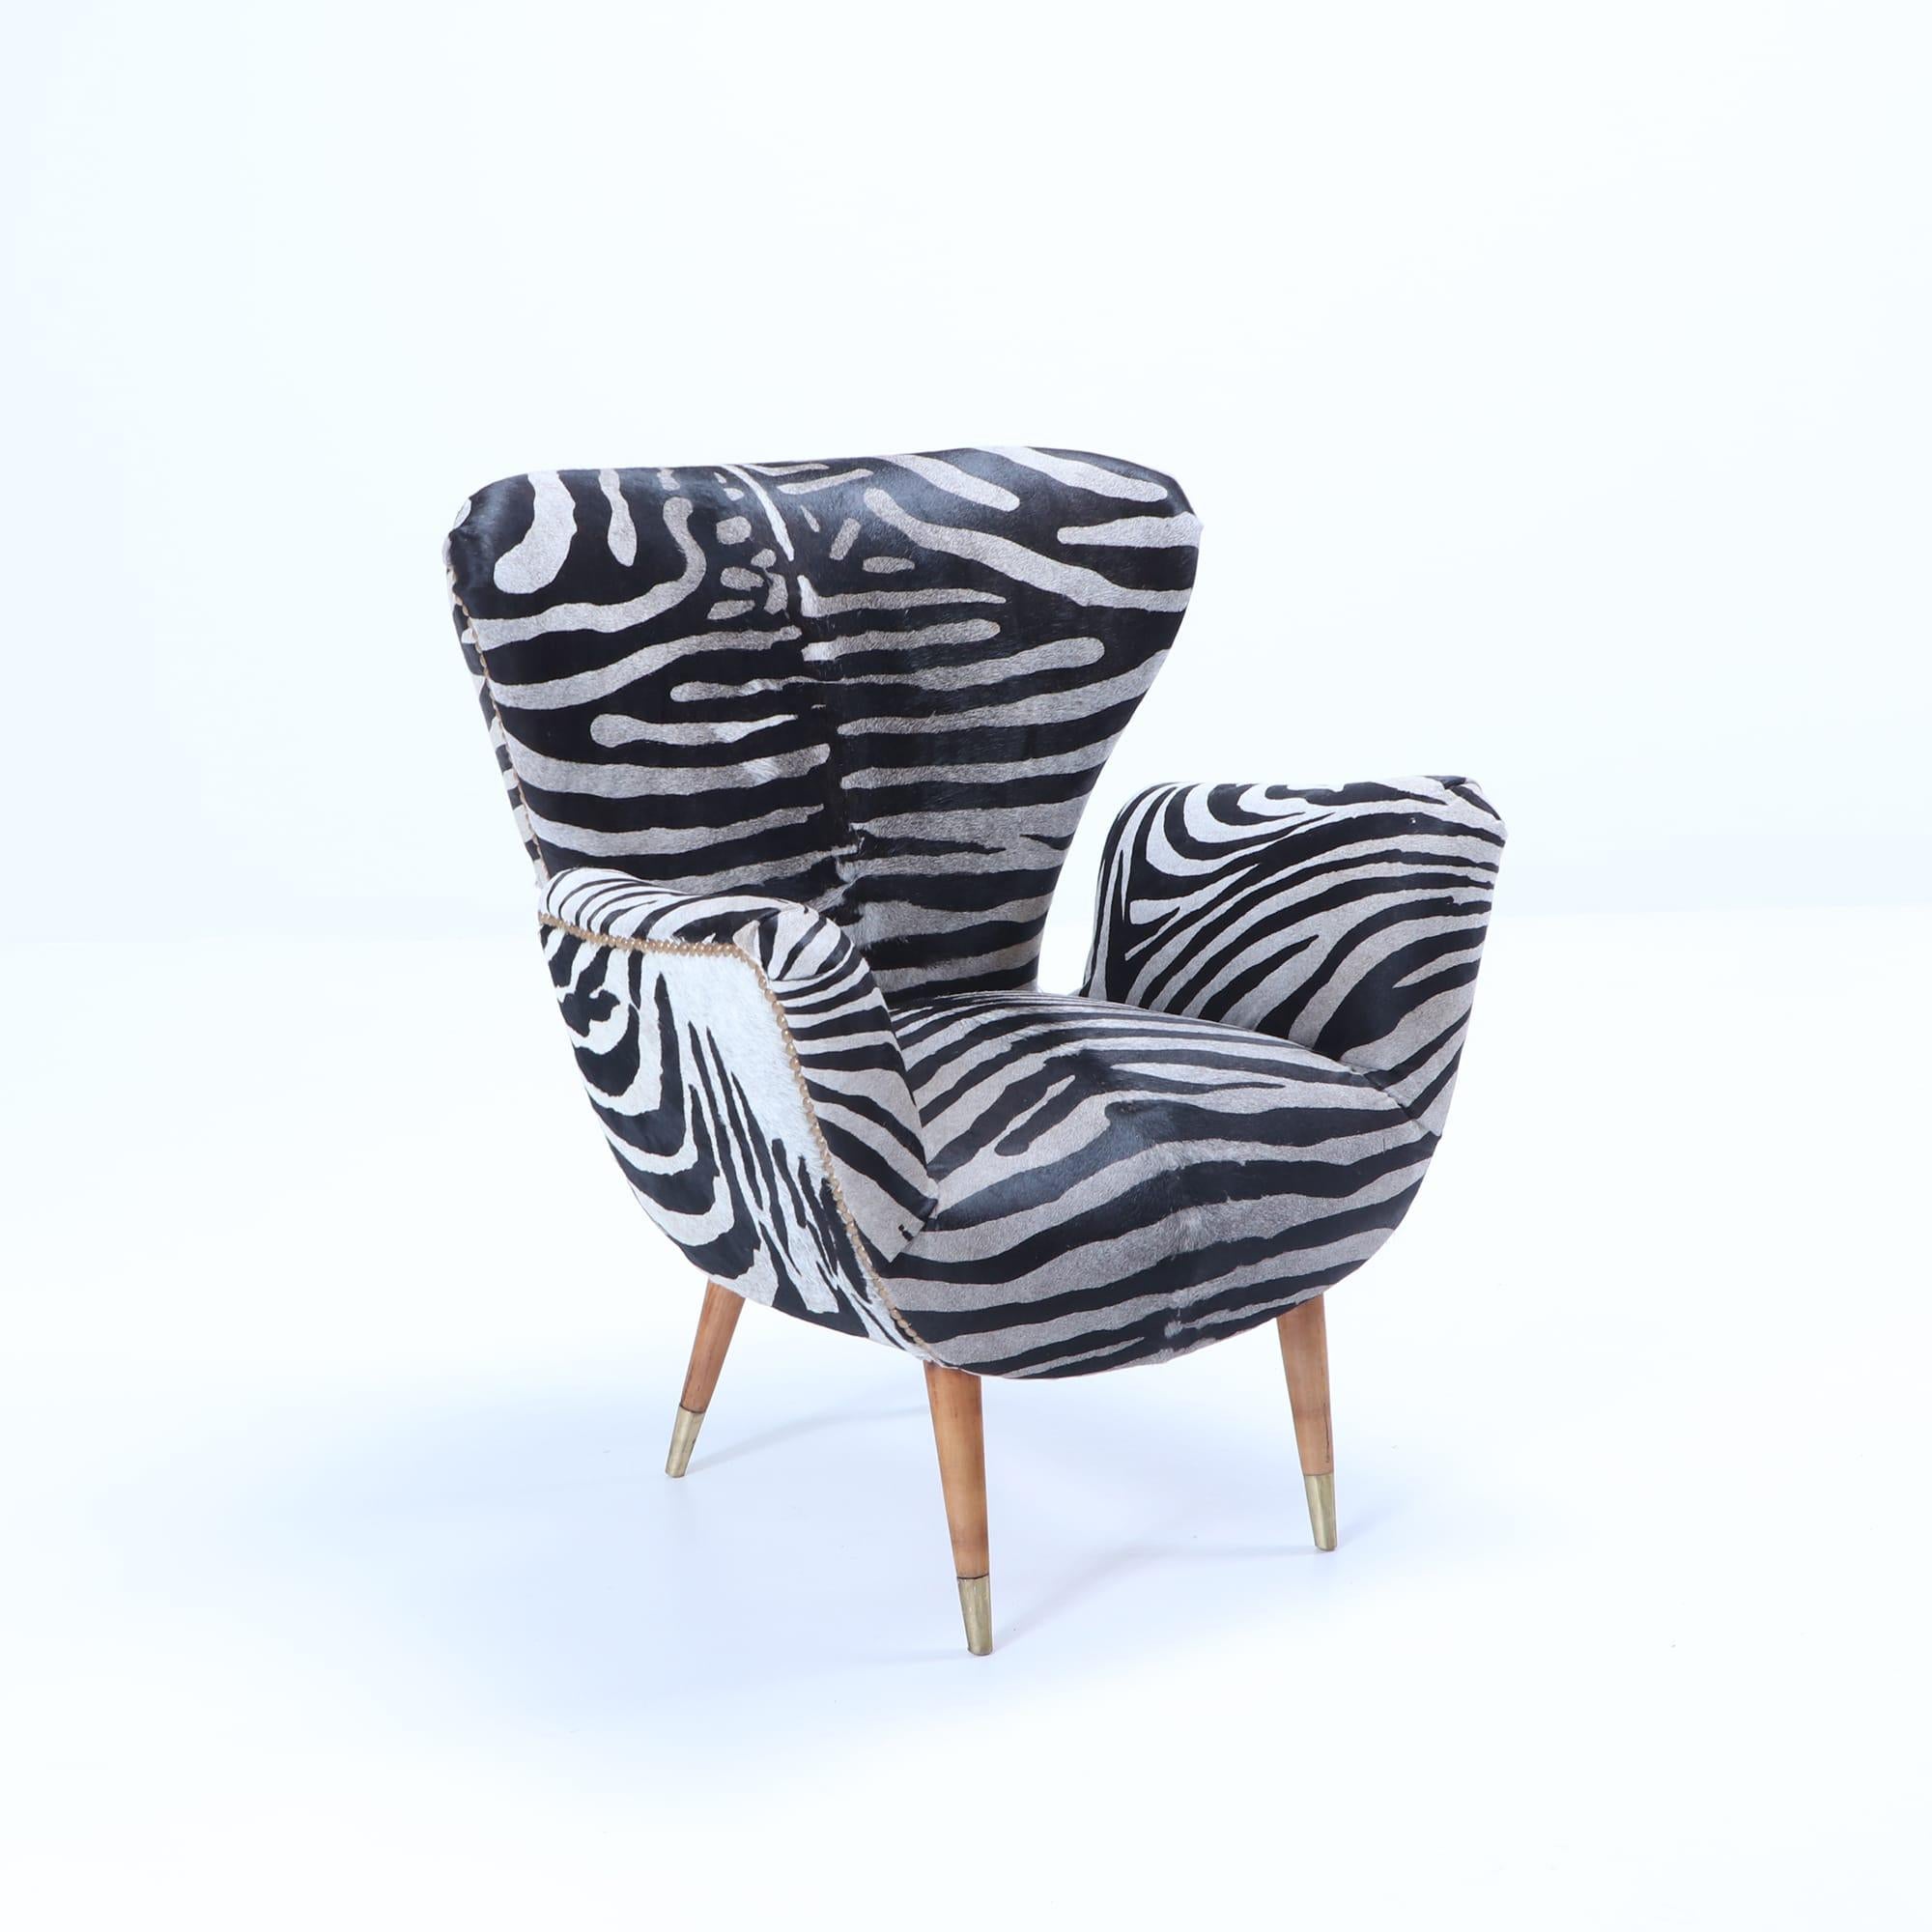 A pair of wingback chairs by Paolo Buffa recently upholstered with zebra print leather, circa 1950.